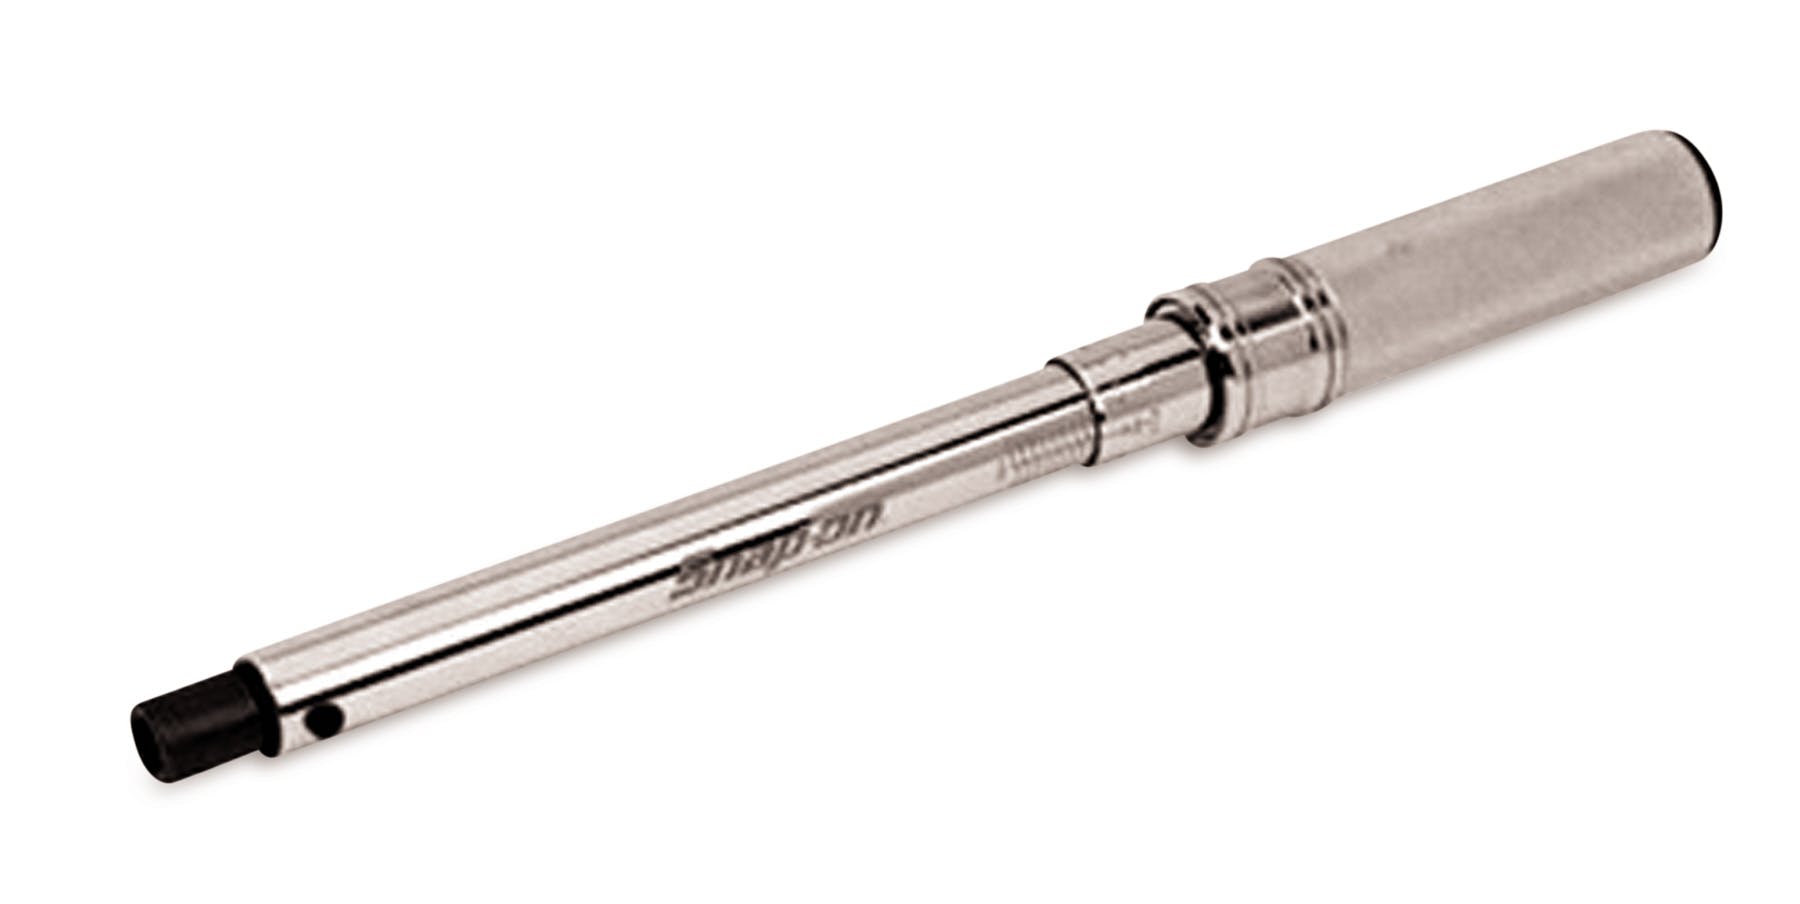 Torque Wrench Bodies/Adjustable Dual Scale/ +/- 4 % Accuracy